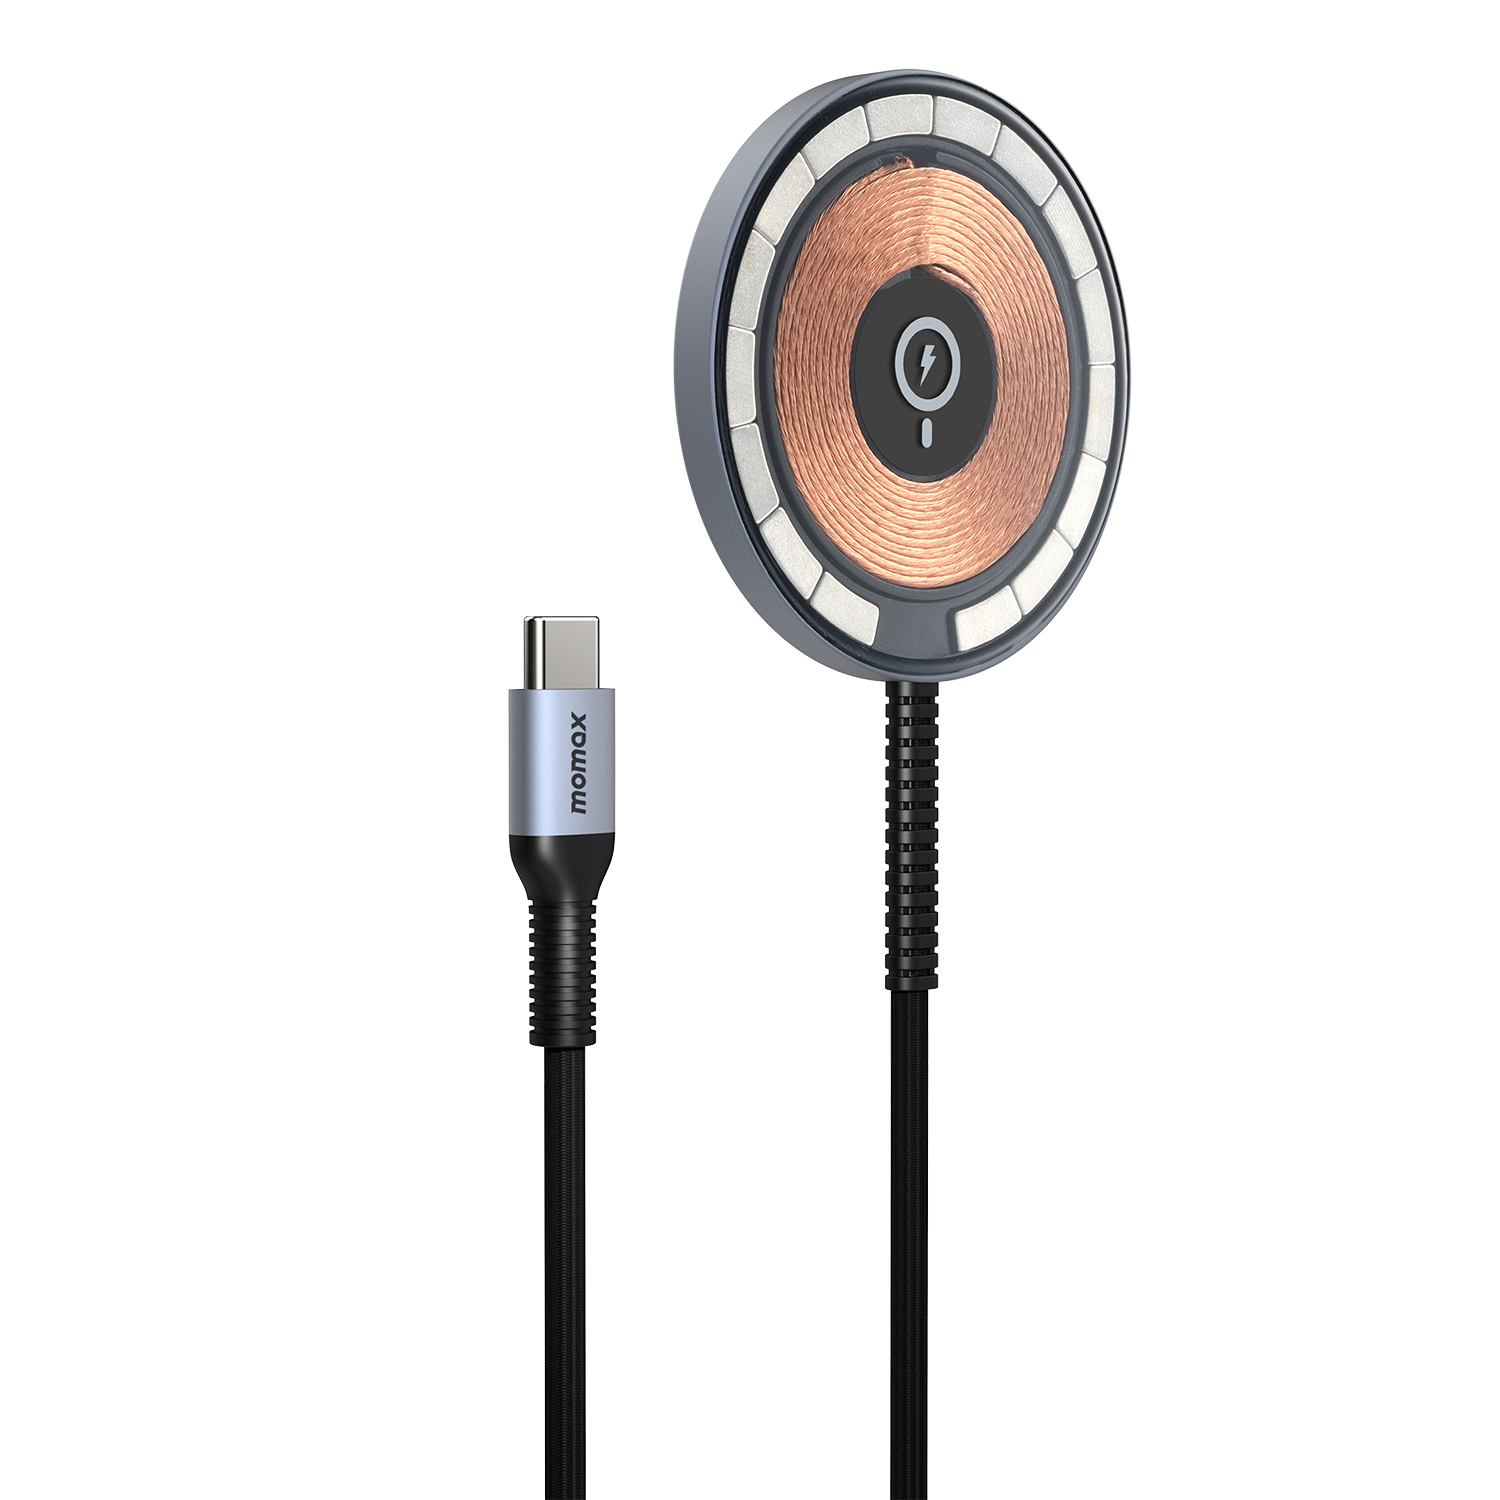 Q.Mag 2 Magnetic Wireless Charger 15W